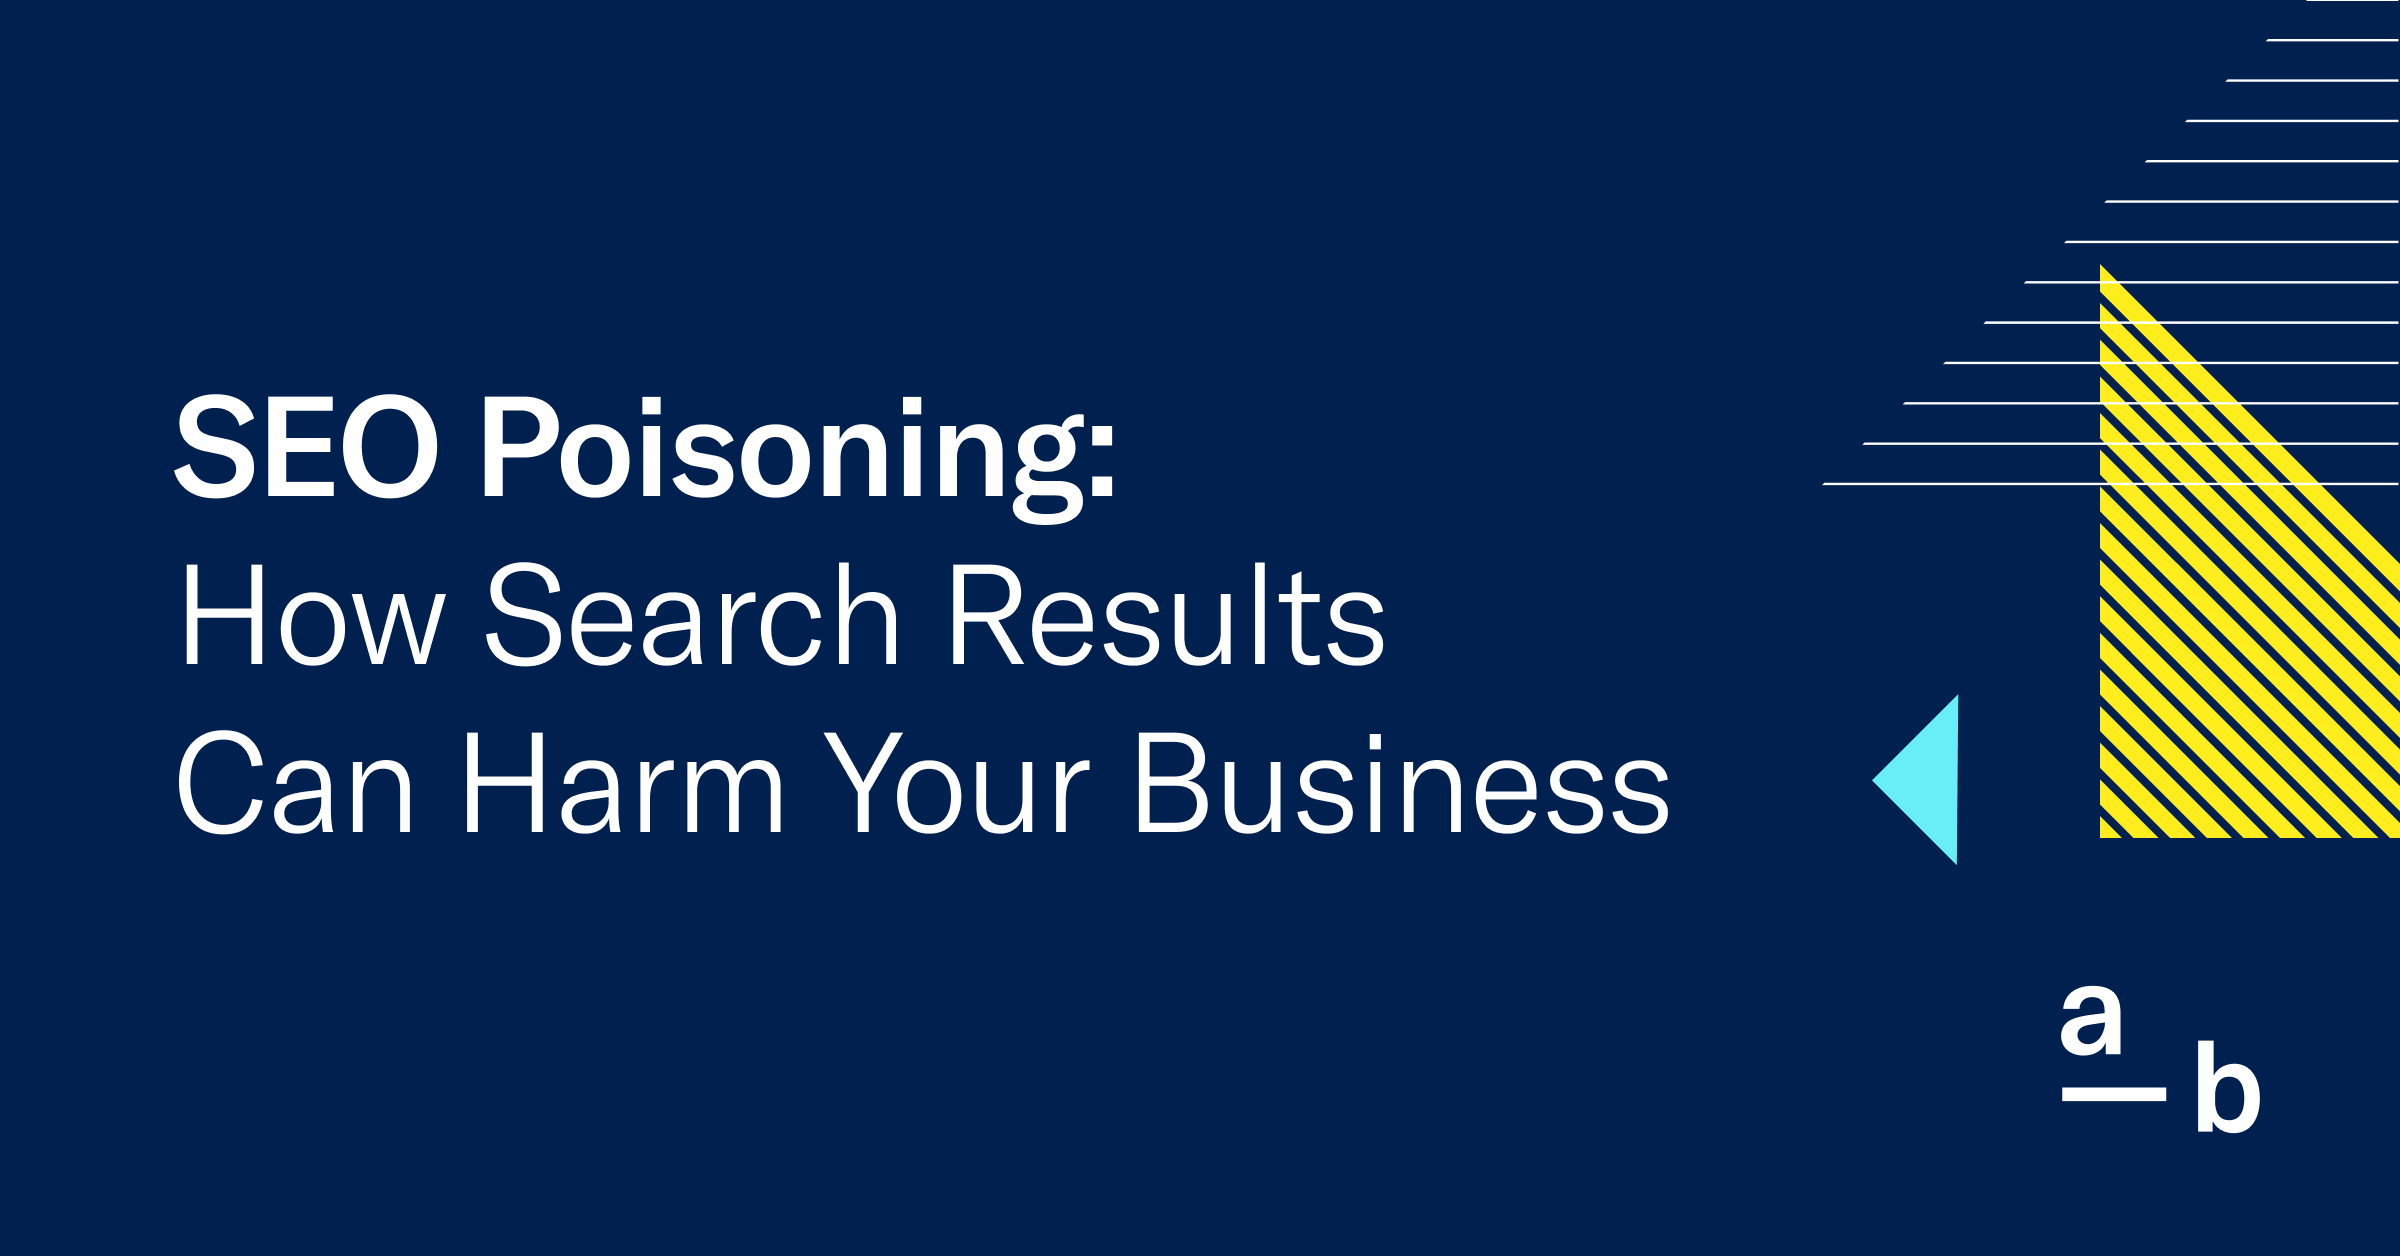 SEO Poisoning: How Search Results Can Harm Your Business